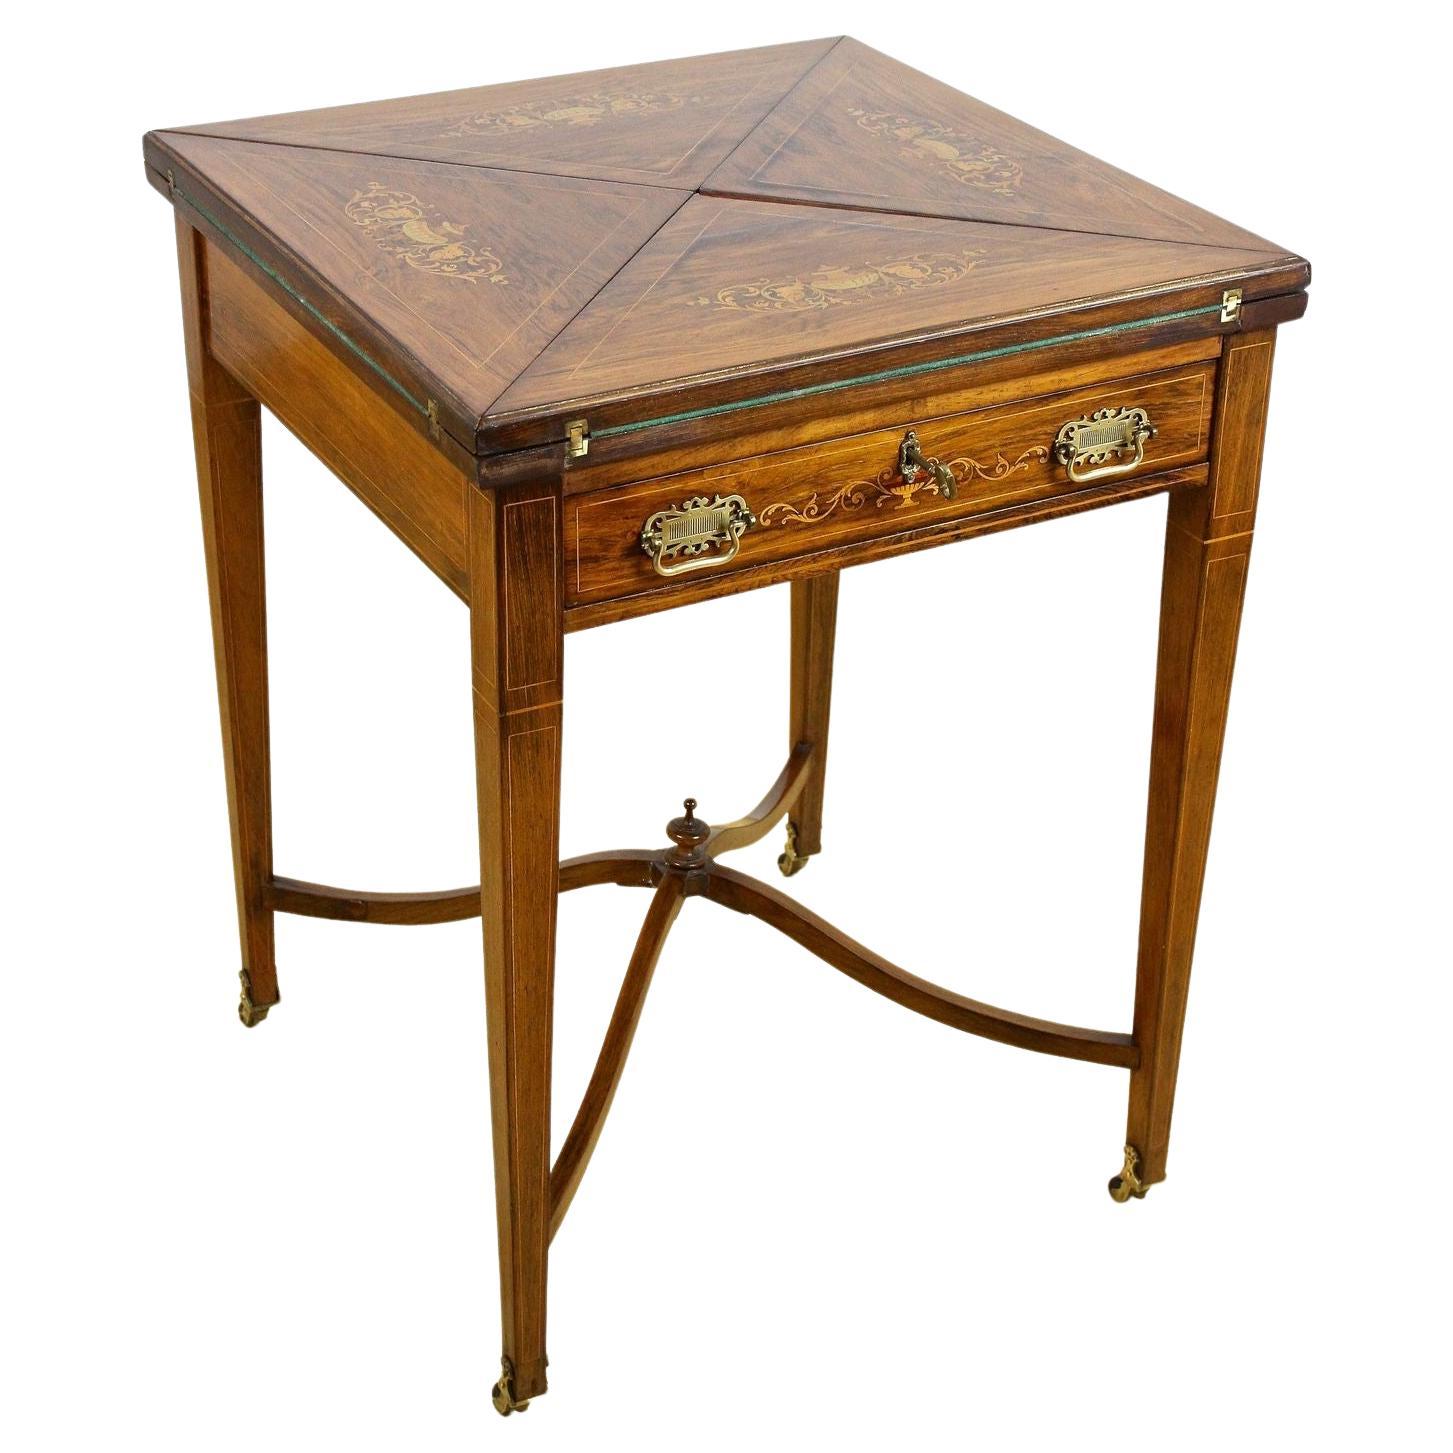 19th Century Victorian Game Table/ Side Table by J. Shoolbred, Uk Ca. 1890